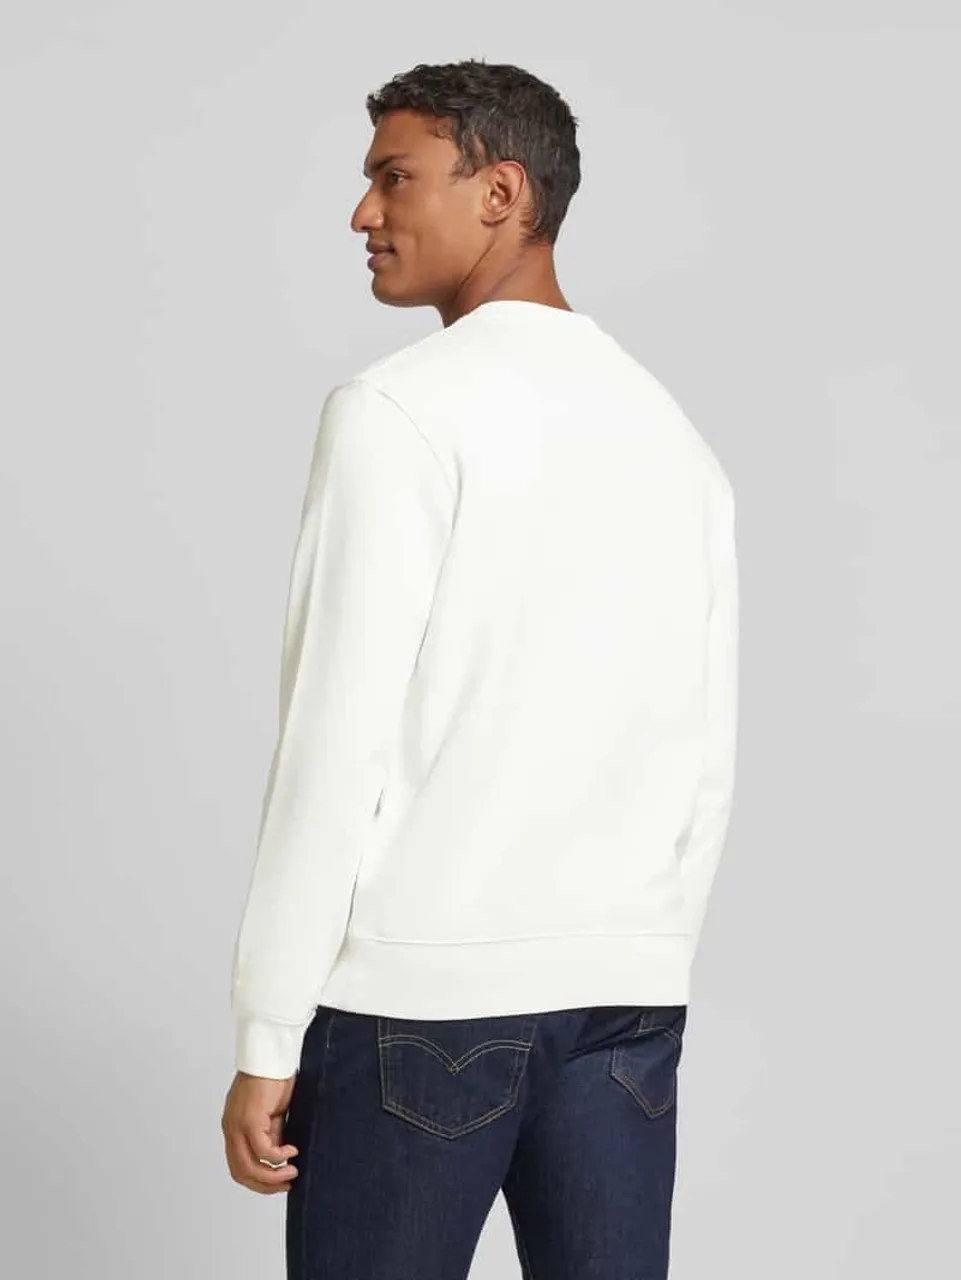 Lacoste Classic Fit Sweatshirt mit Label-Print in Offwhite